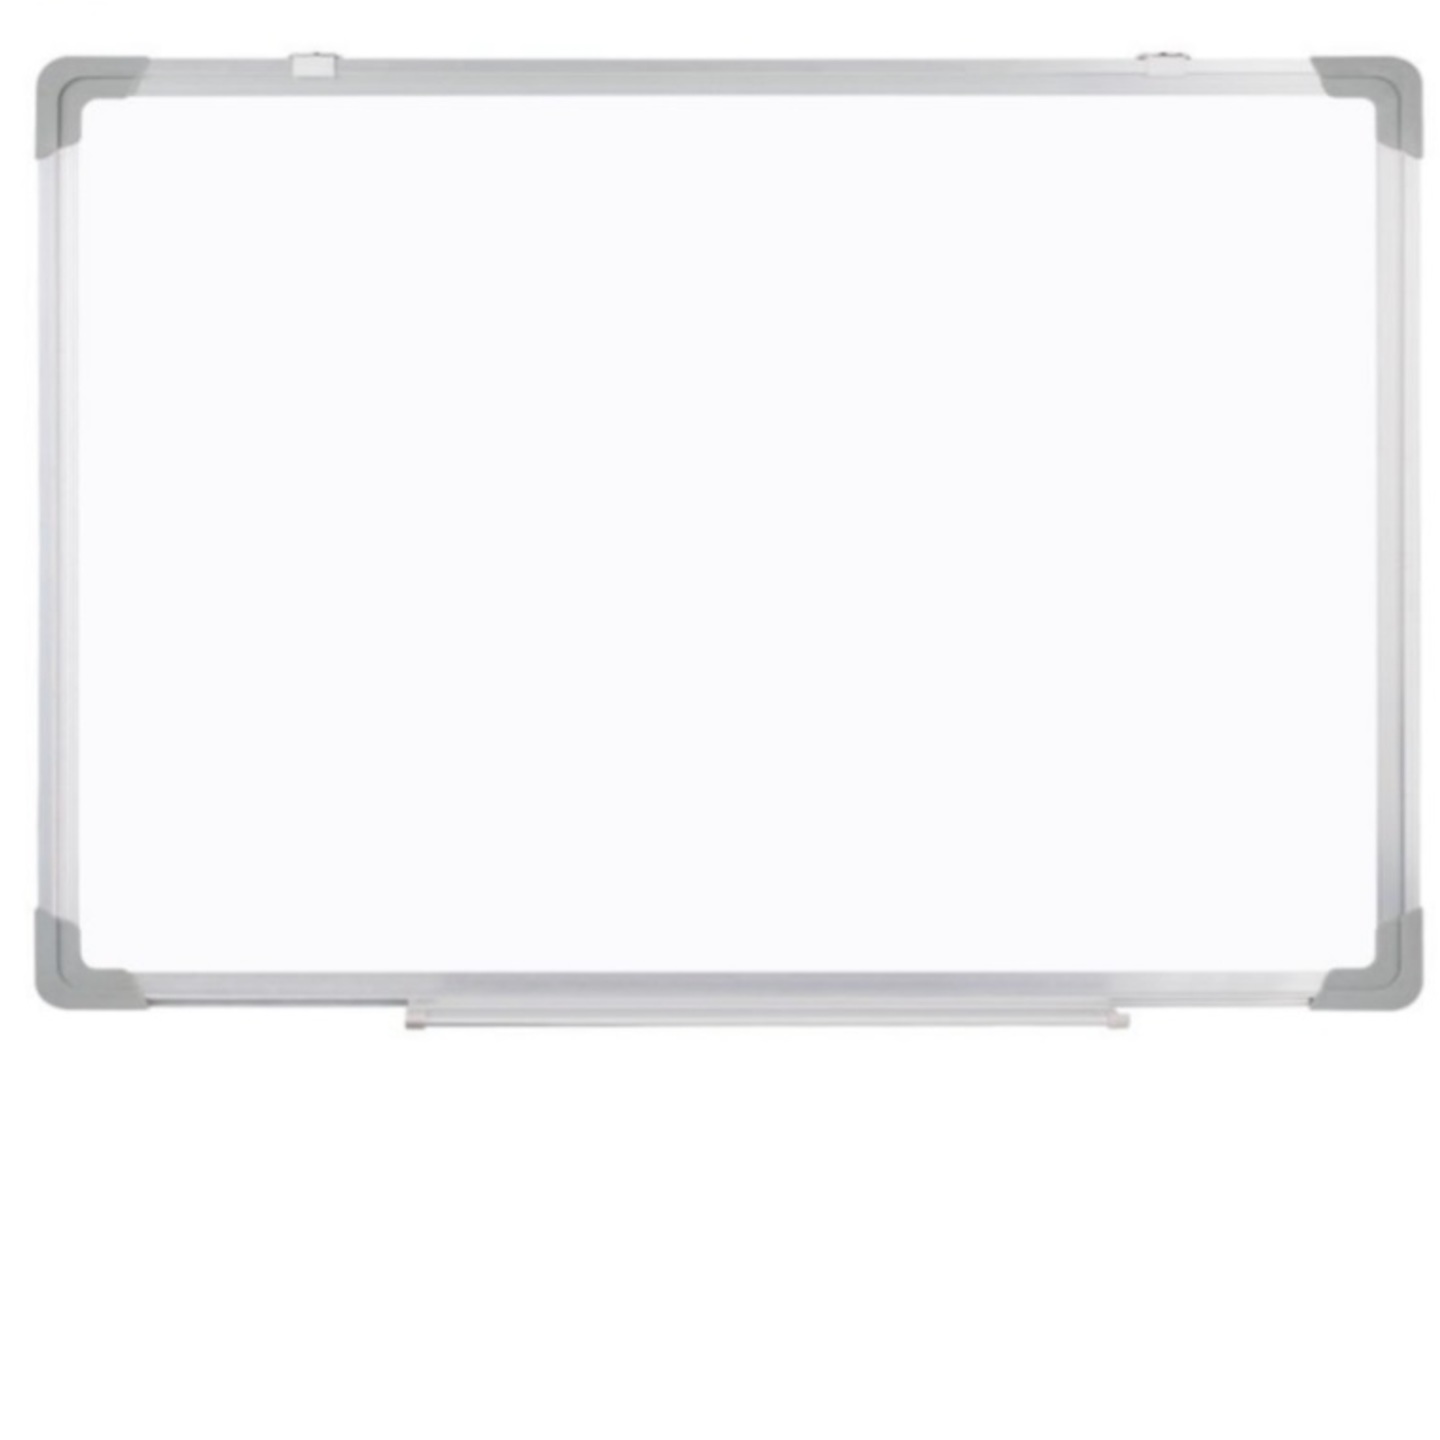 4ft x 3ft Magnetic White Board with Tray